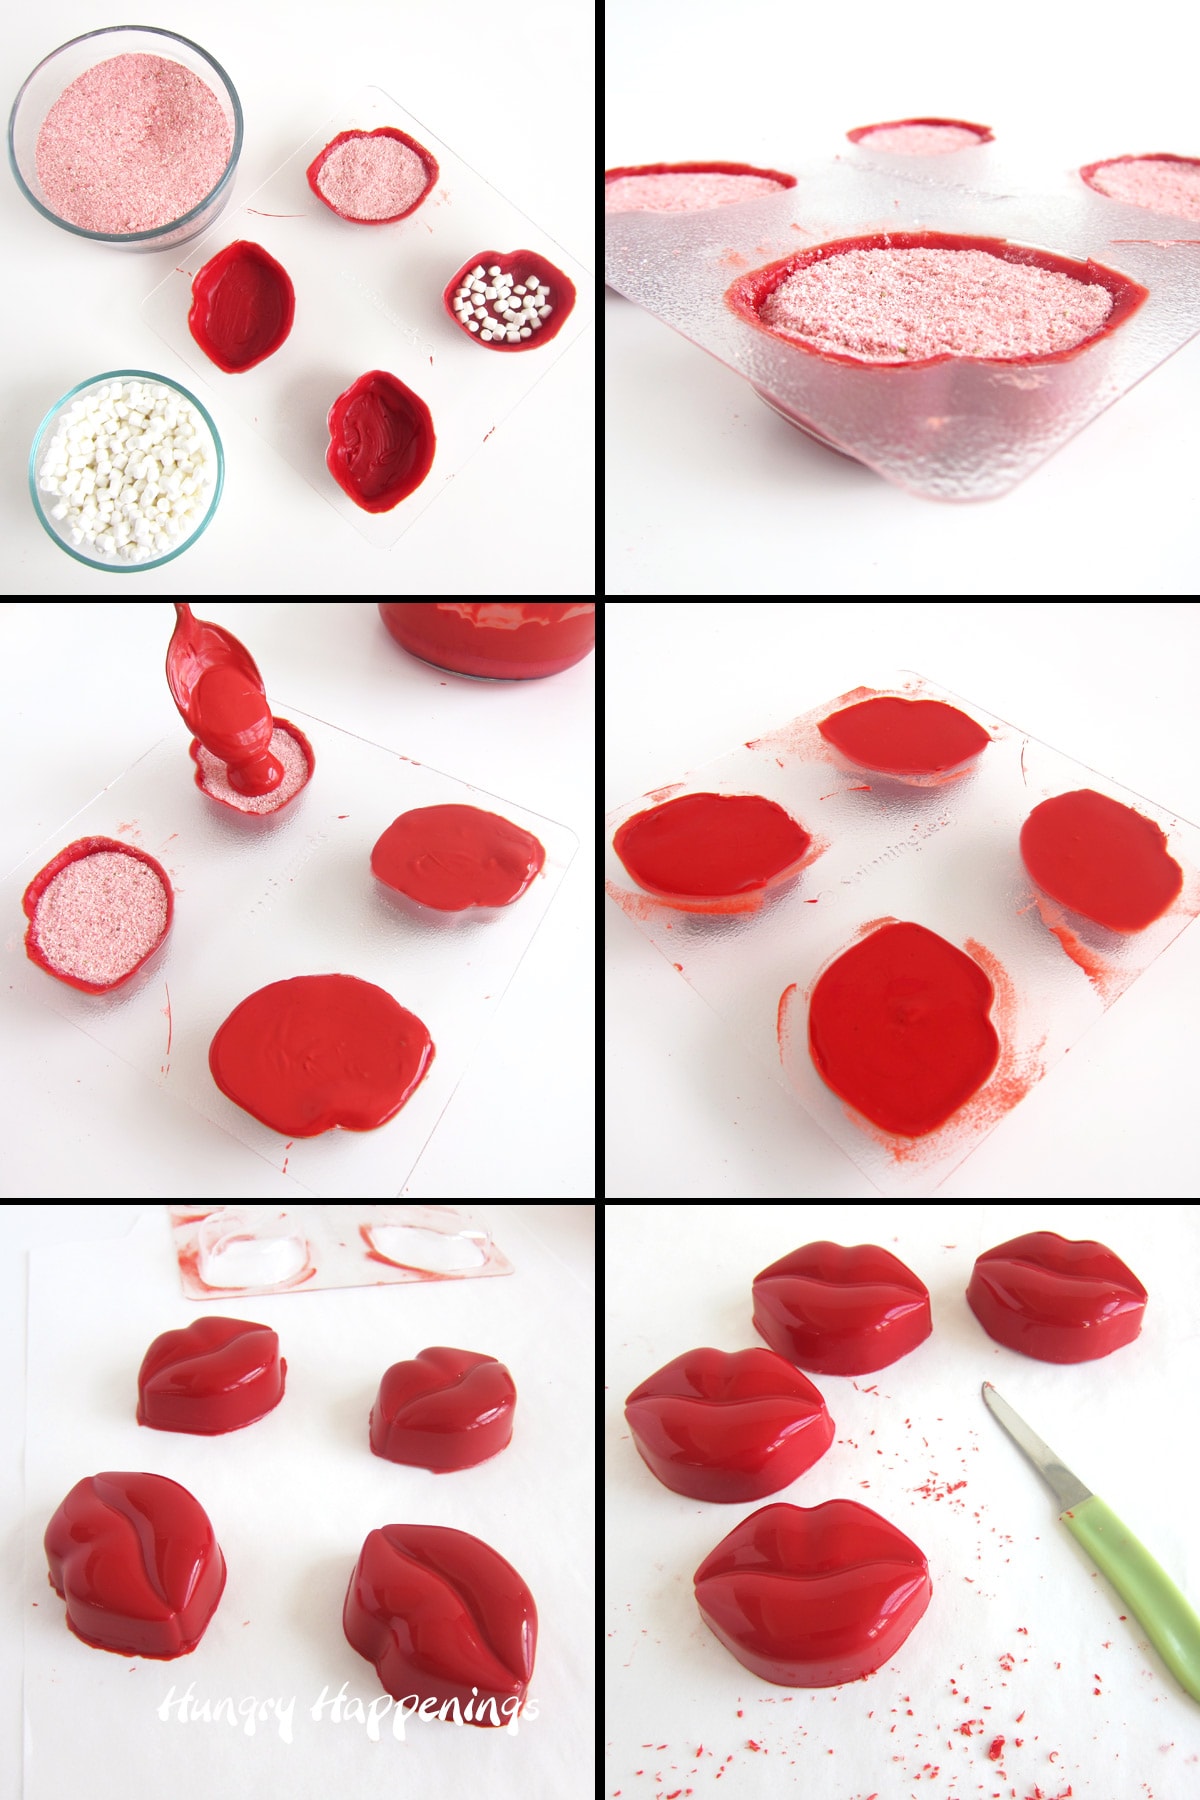 fill the red hot chocolate bomb lips with strawberry hot cocoa mix and dehydrated marshmallows, then cover with more red candy melts, harden, and unmold